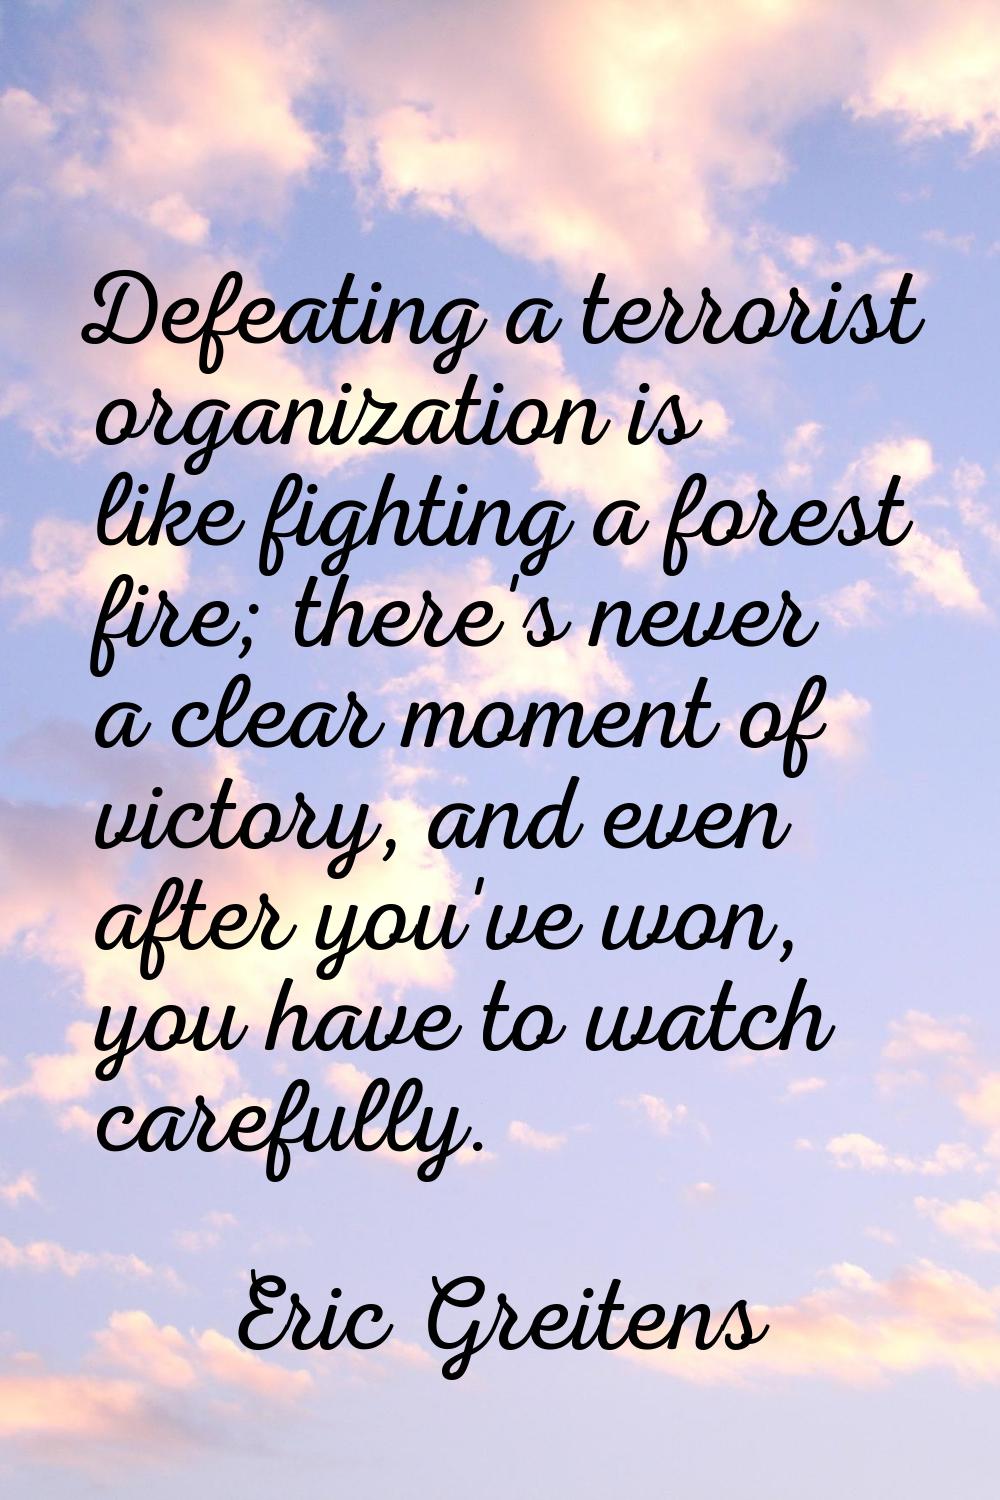 Defeating a terrorist organization is like fighting a forest fire; there's never a clear moment of 